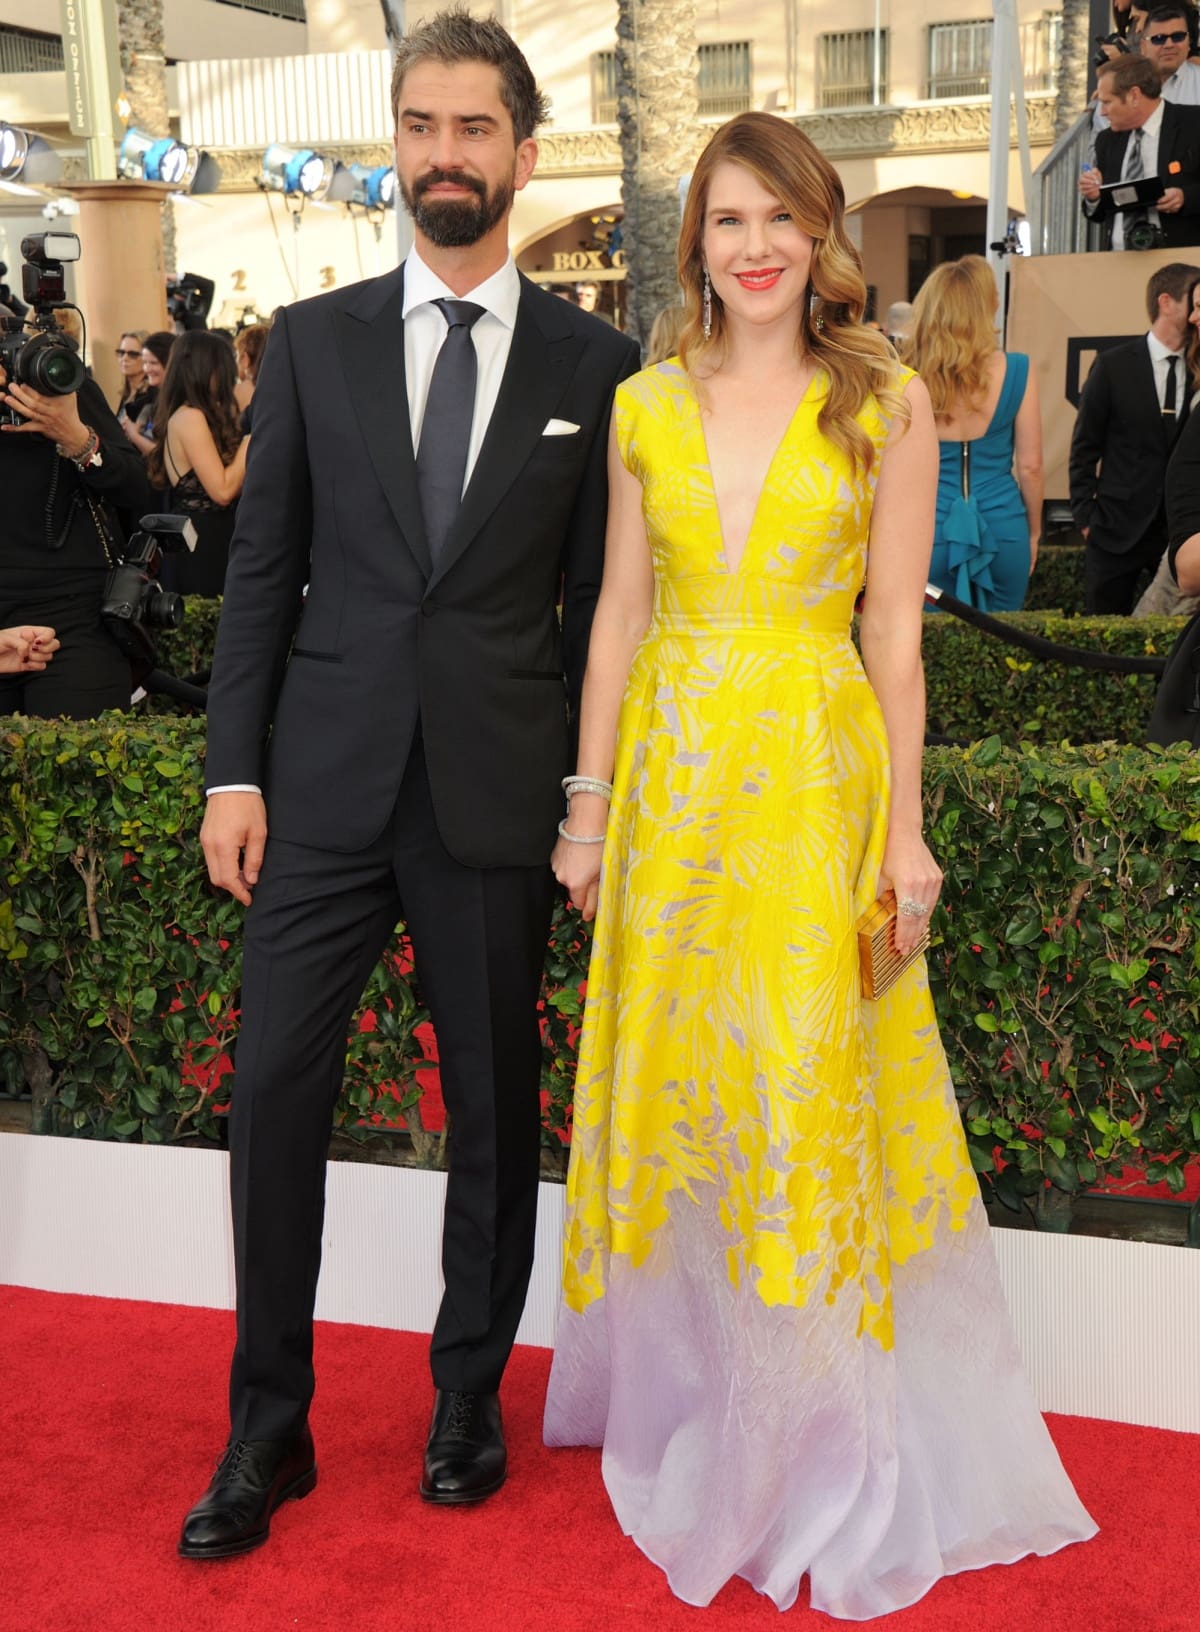 The secret to the success of the marriage of Hamish Linklater and Lily Rabe is that they keep their relationship private and ensure that their kids are out of the public eye